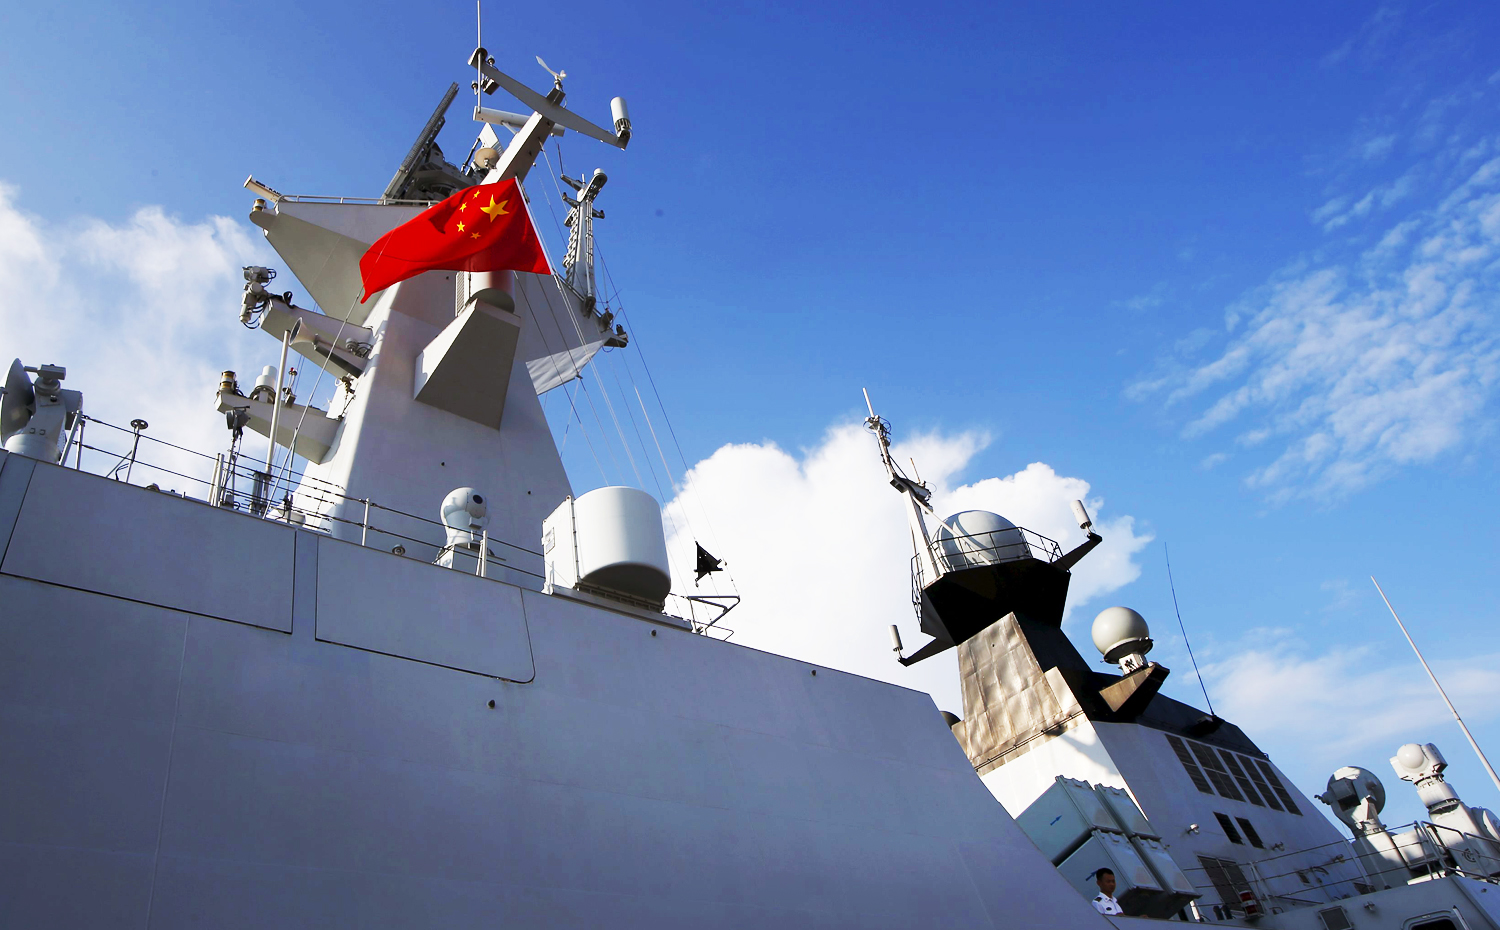 The PLA Navy's Jiangkai II frigate docks in Singapore for the Imdex Asia maritime defence show. Photo: Reuters 